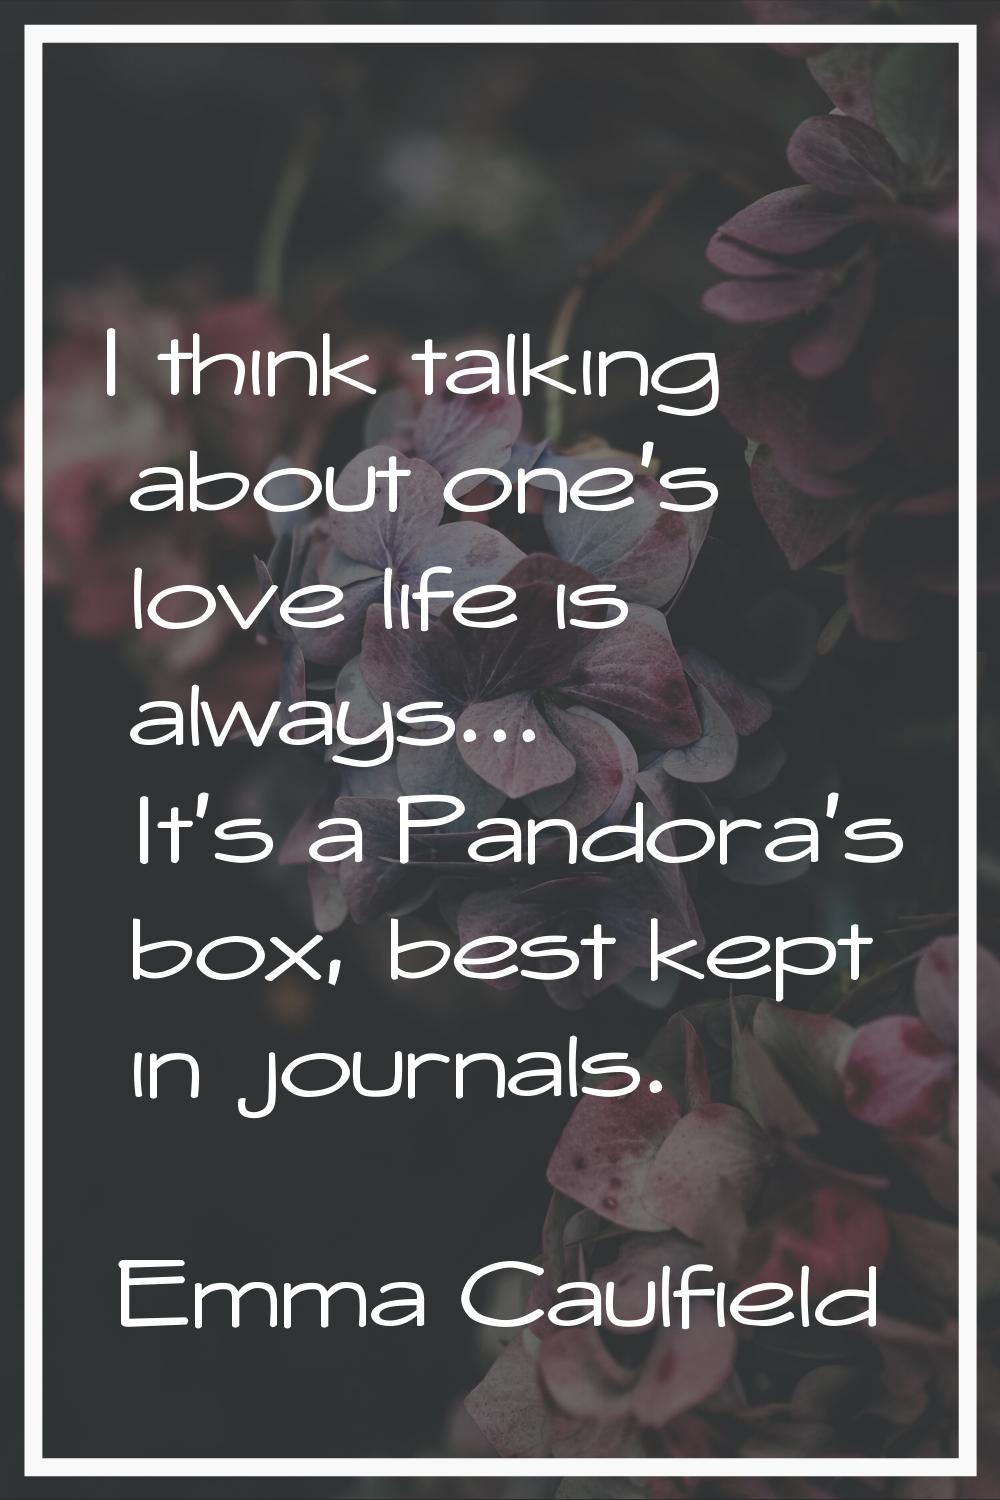 I think talking about one's love life is always... It's a Pandora's box, best kept in journals.